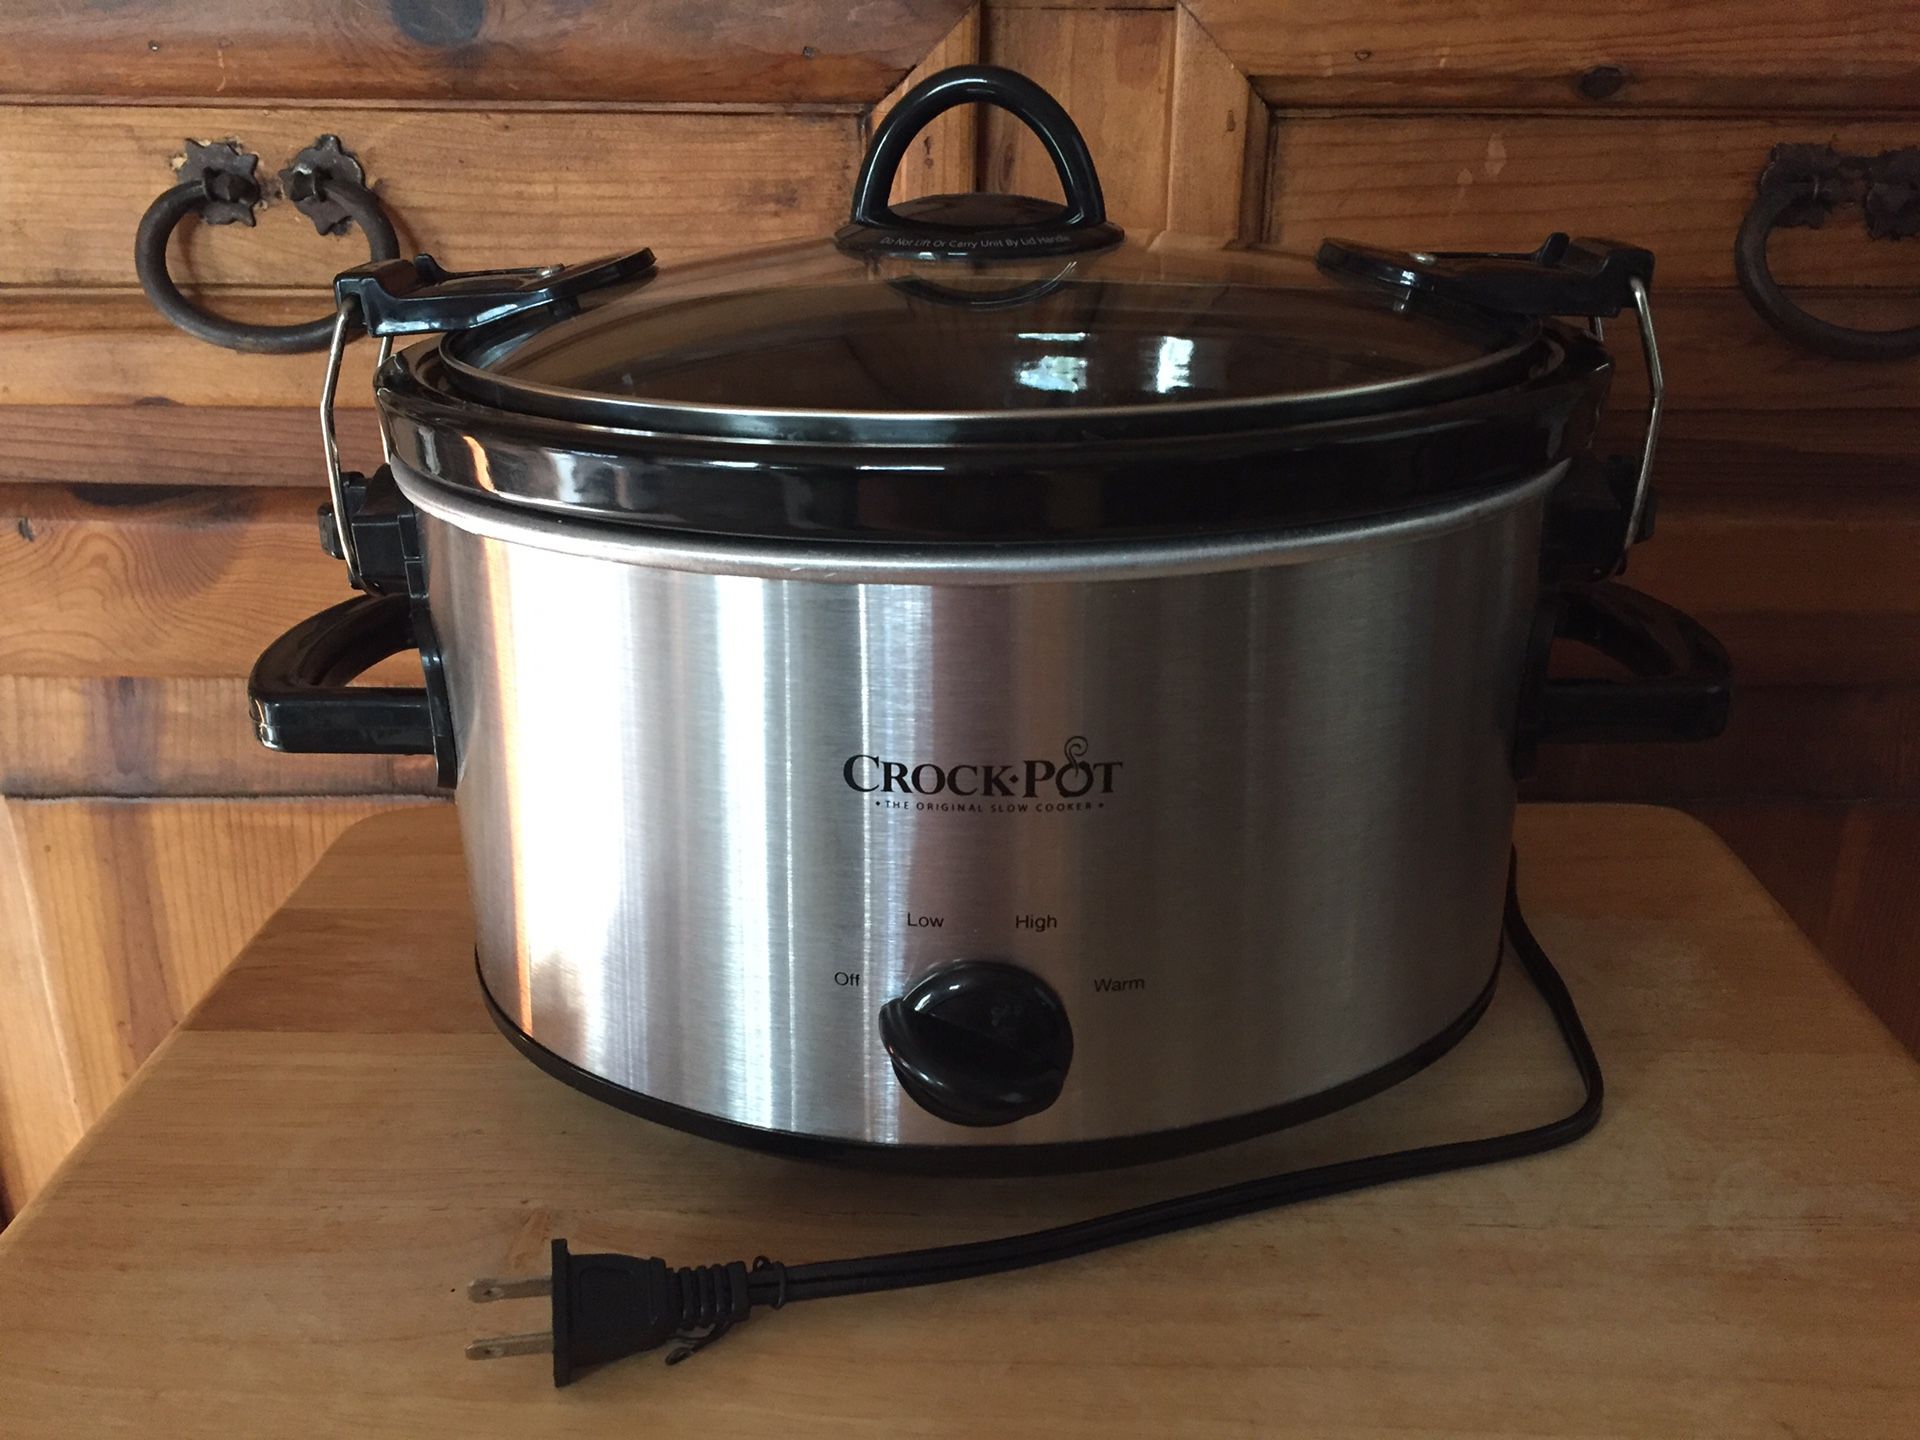 Crock-Pot 4-Quart Cook and Carry Slow Cooker, Stainless Steel